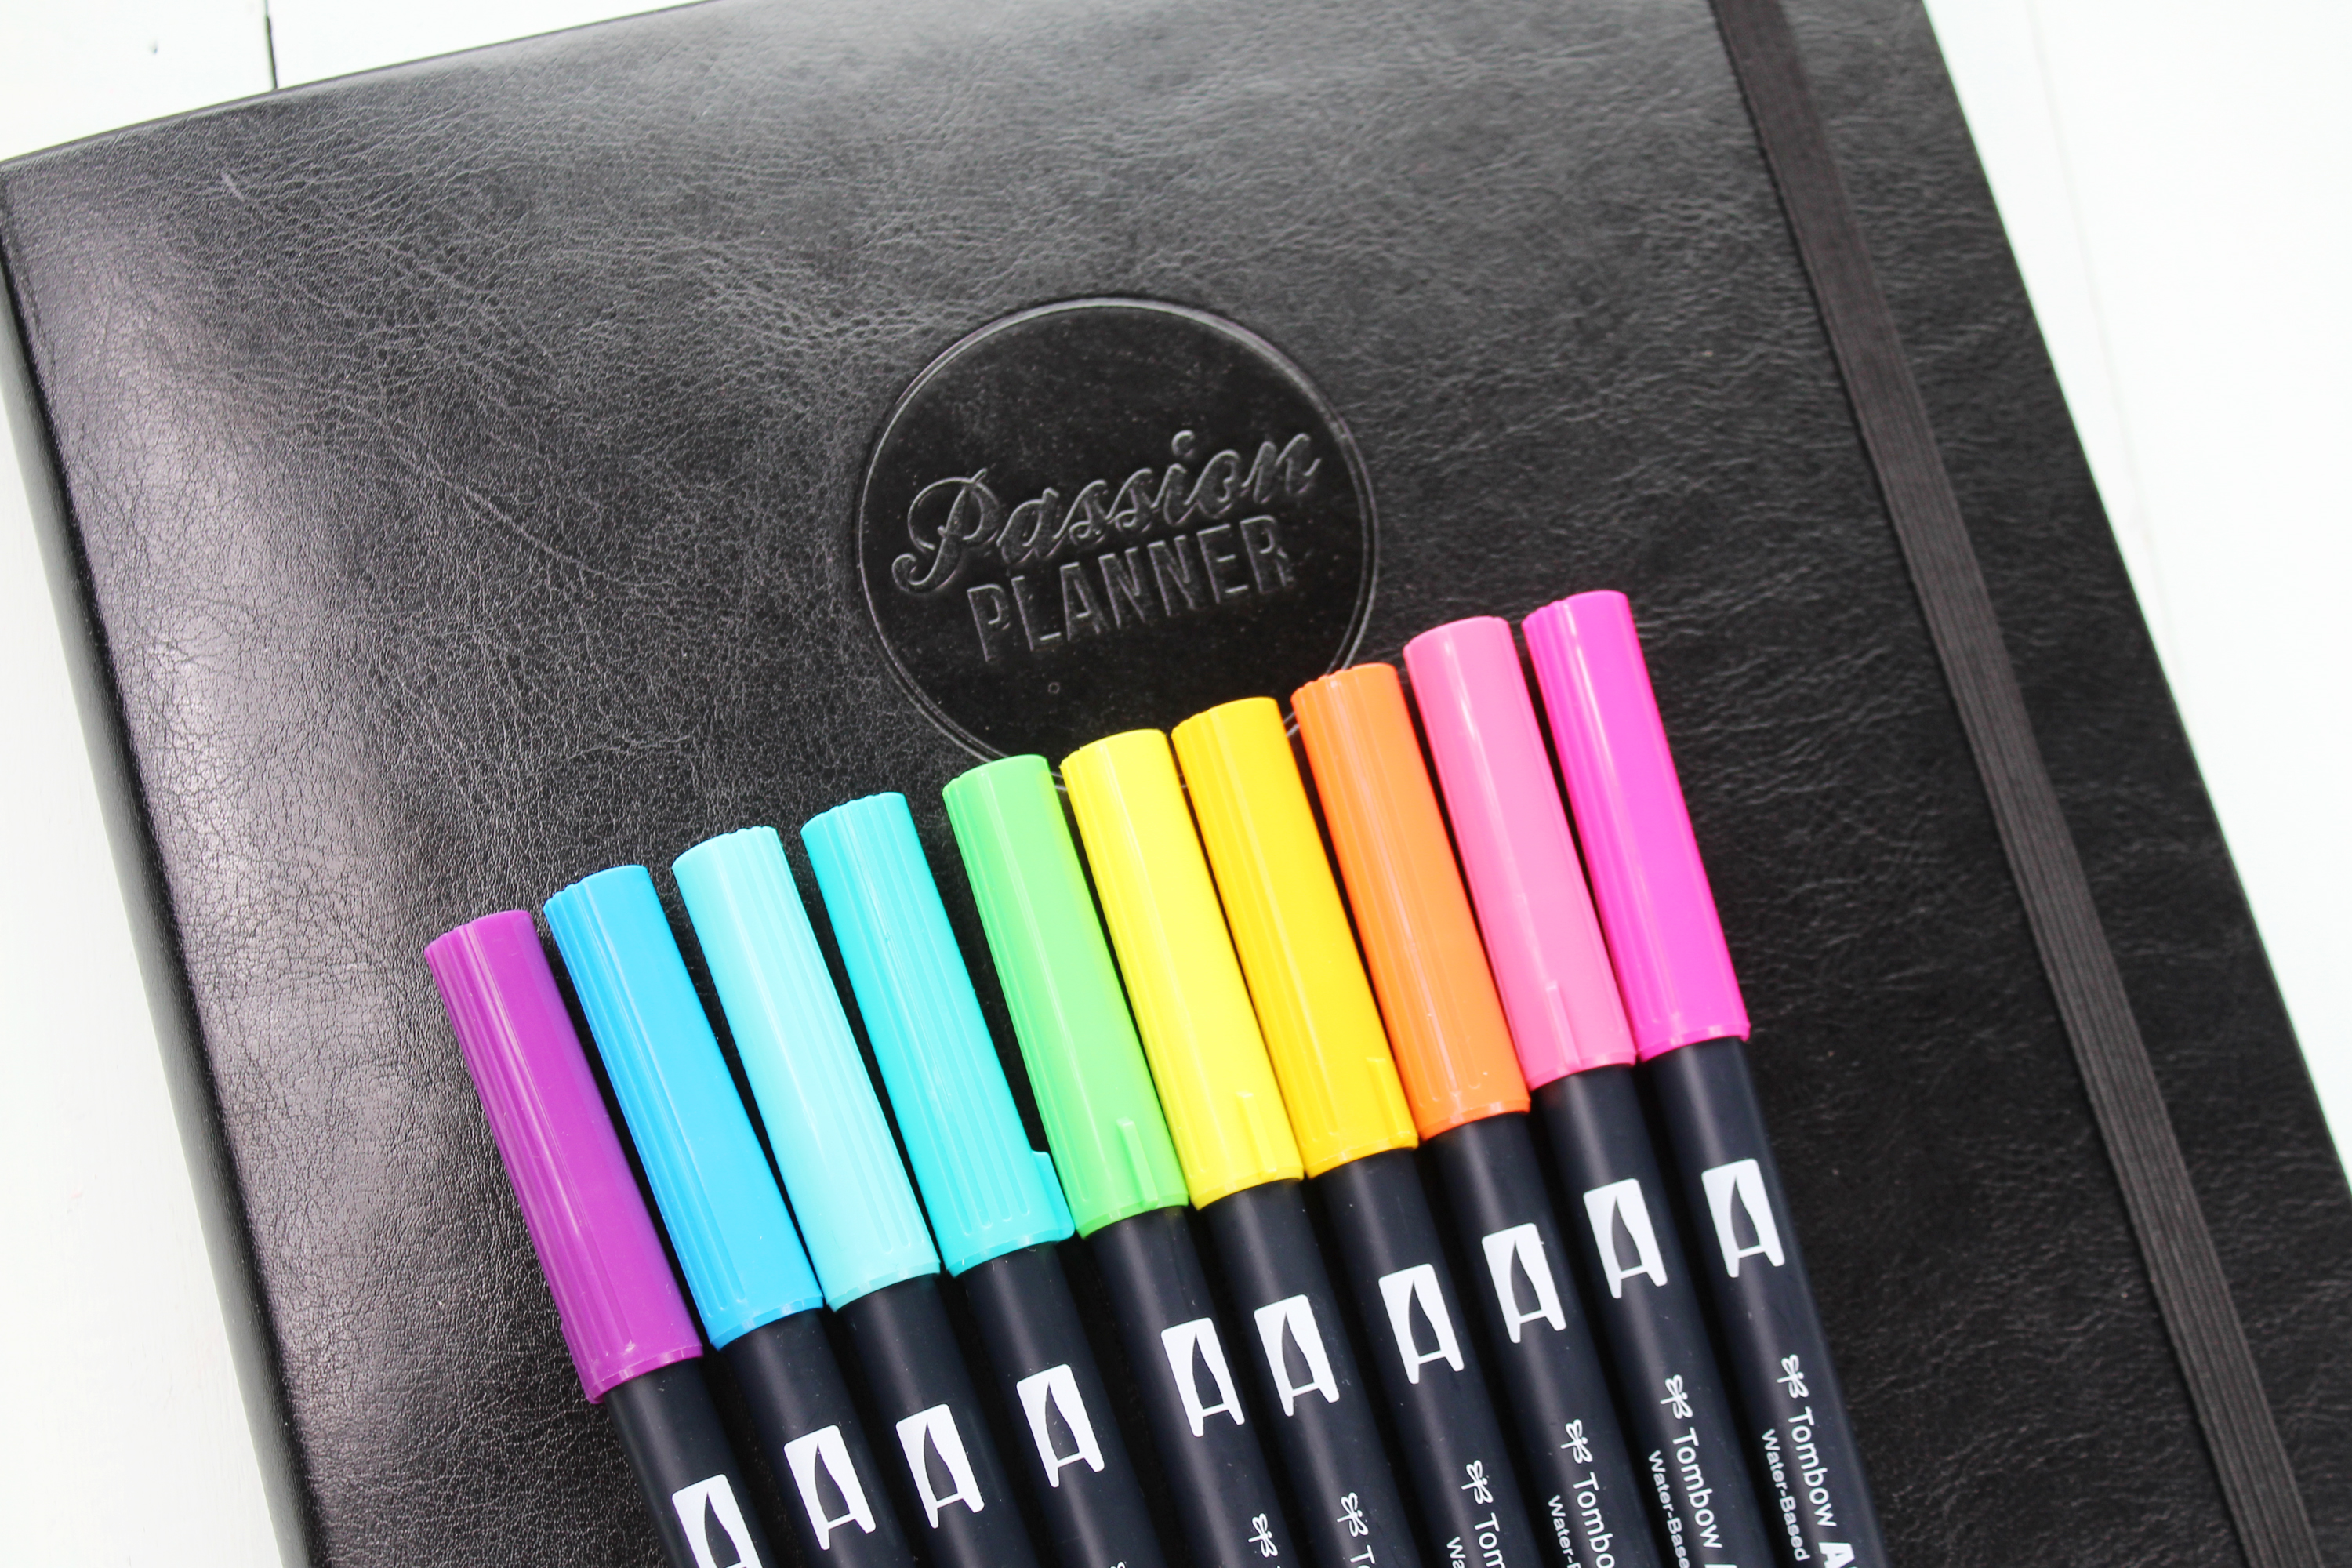 Tombow Dual Brush Pens in bright rainbow colors resting on a black leather Passion Planner showing logo.